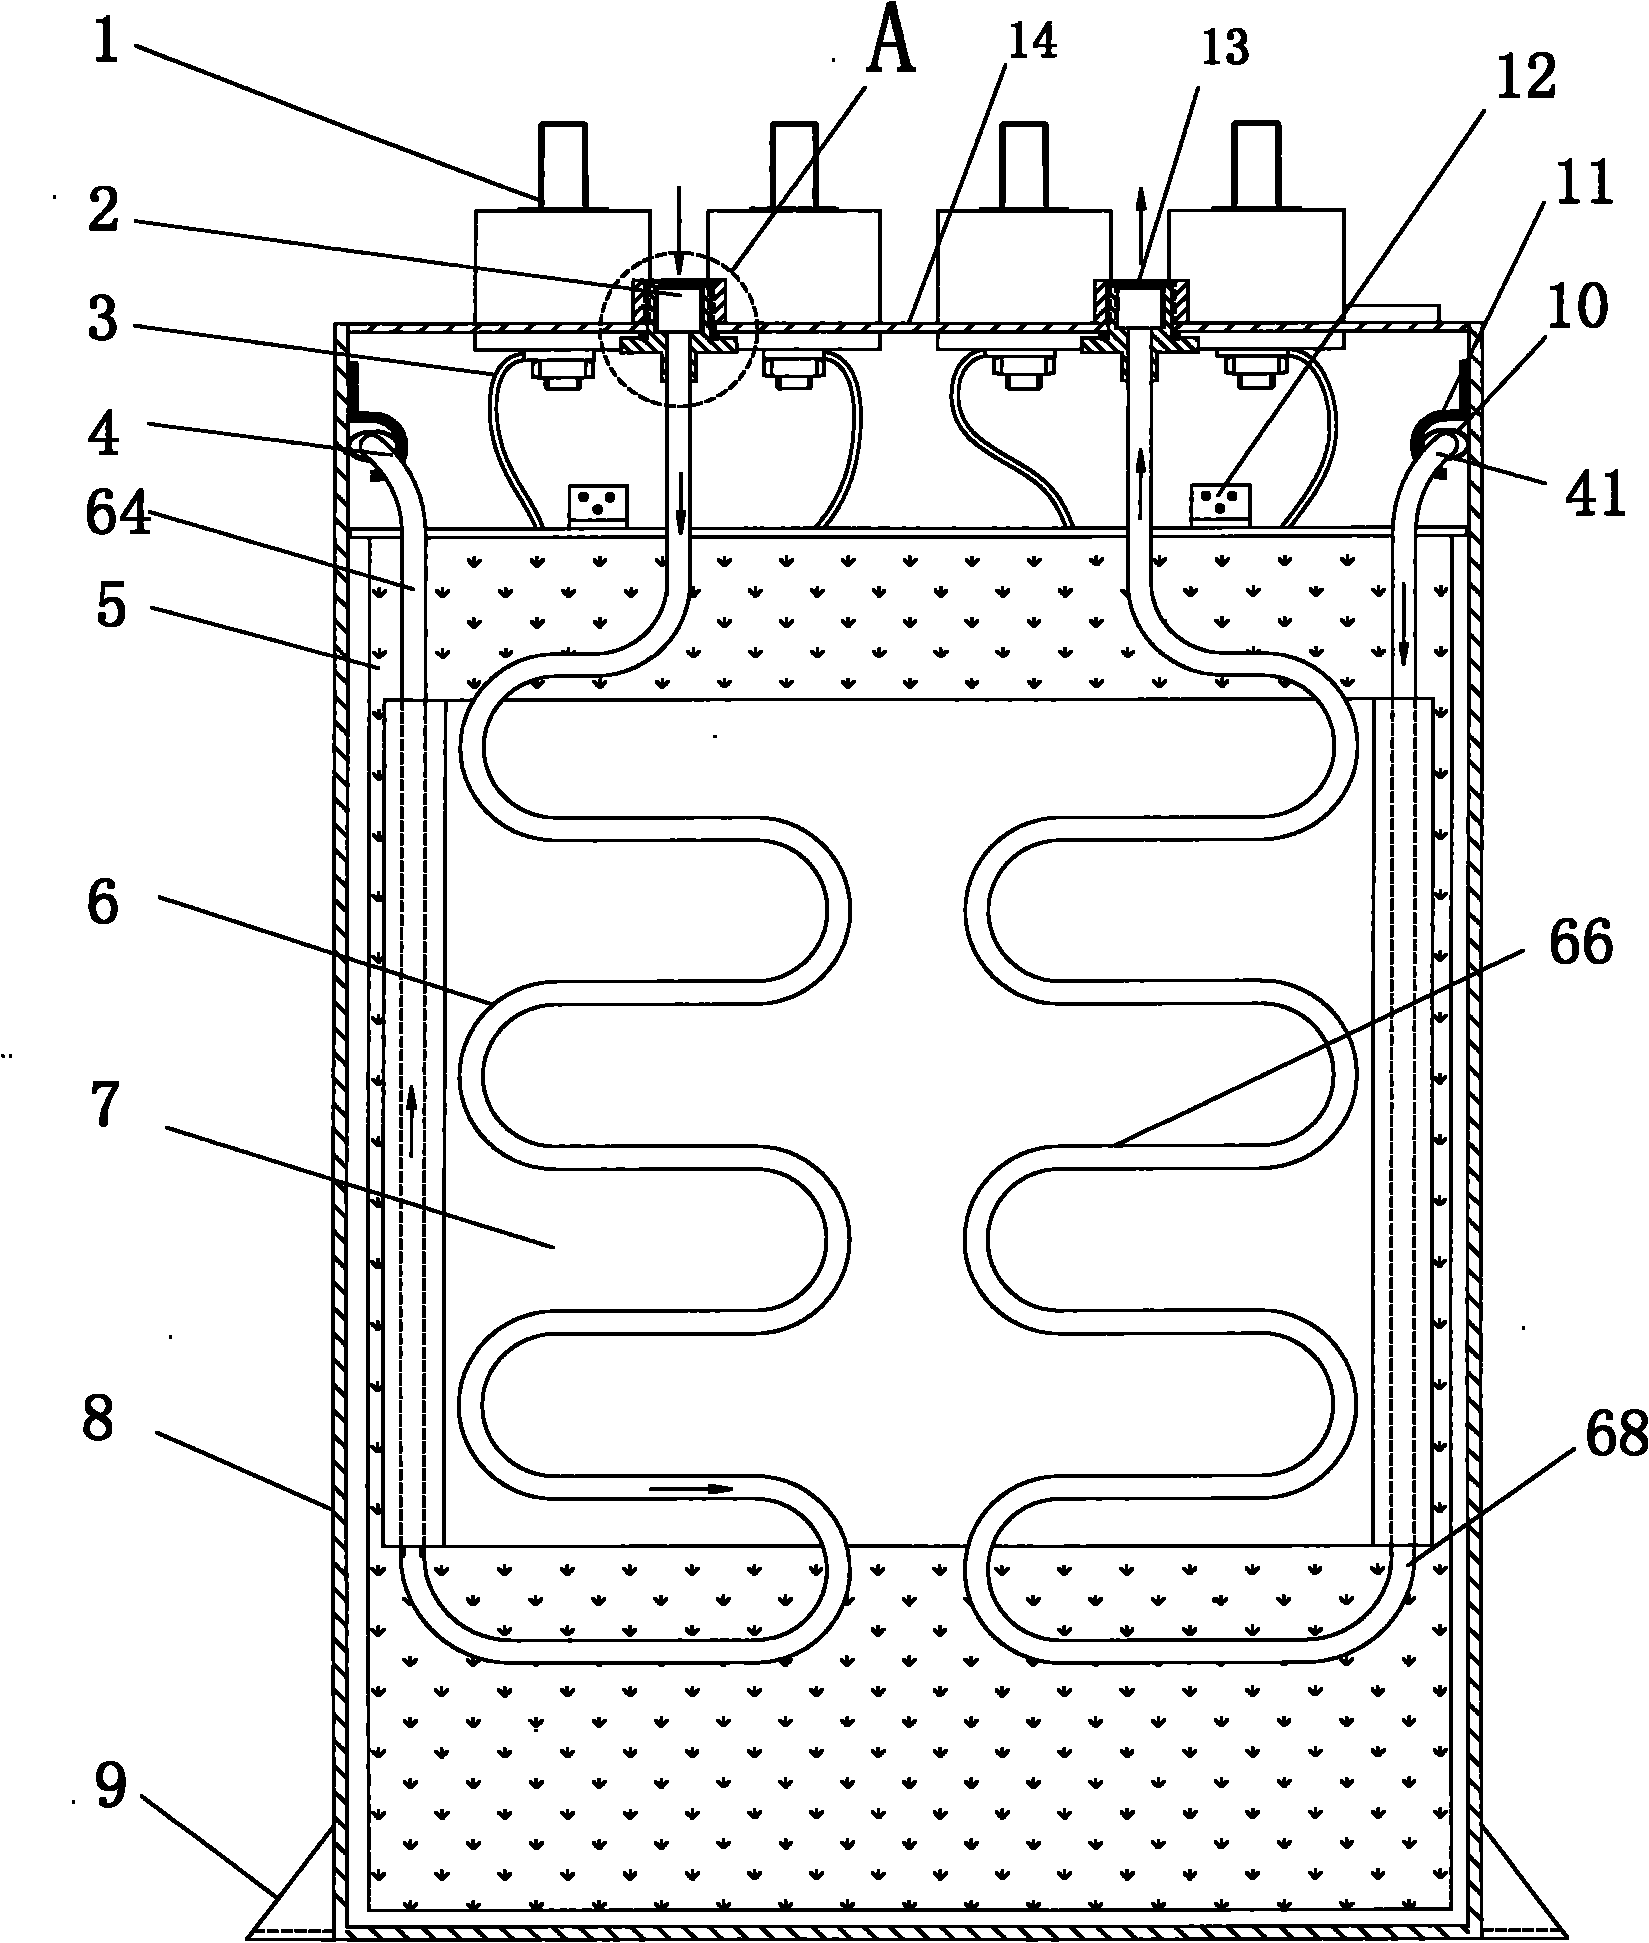 Oil-immersed water-cooled high-power electric and electronic capacitor